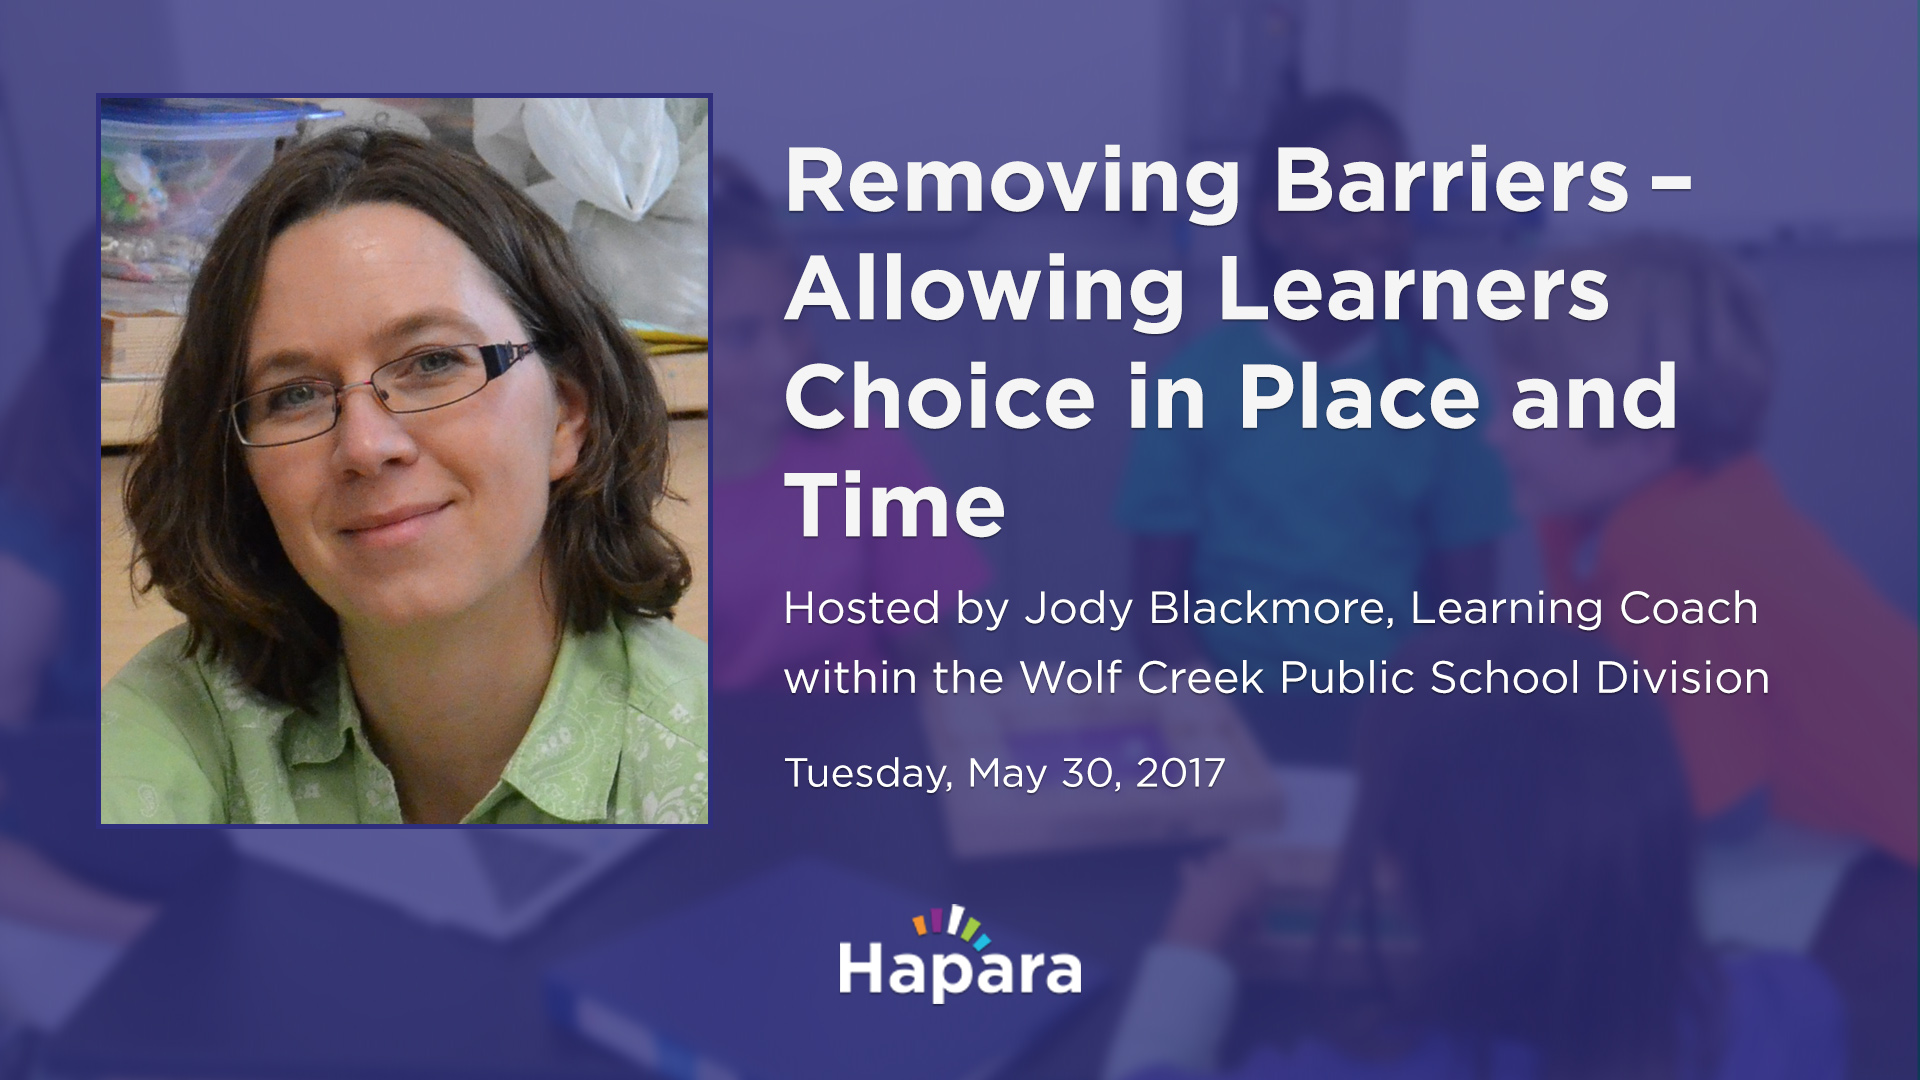 Removing Barriers - Allowing Learners Choice in Place and Time Webinar